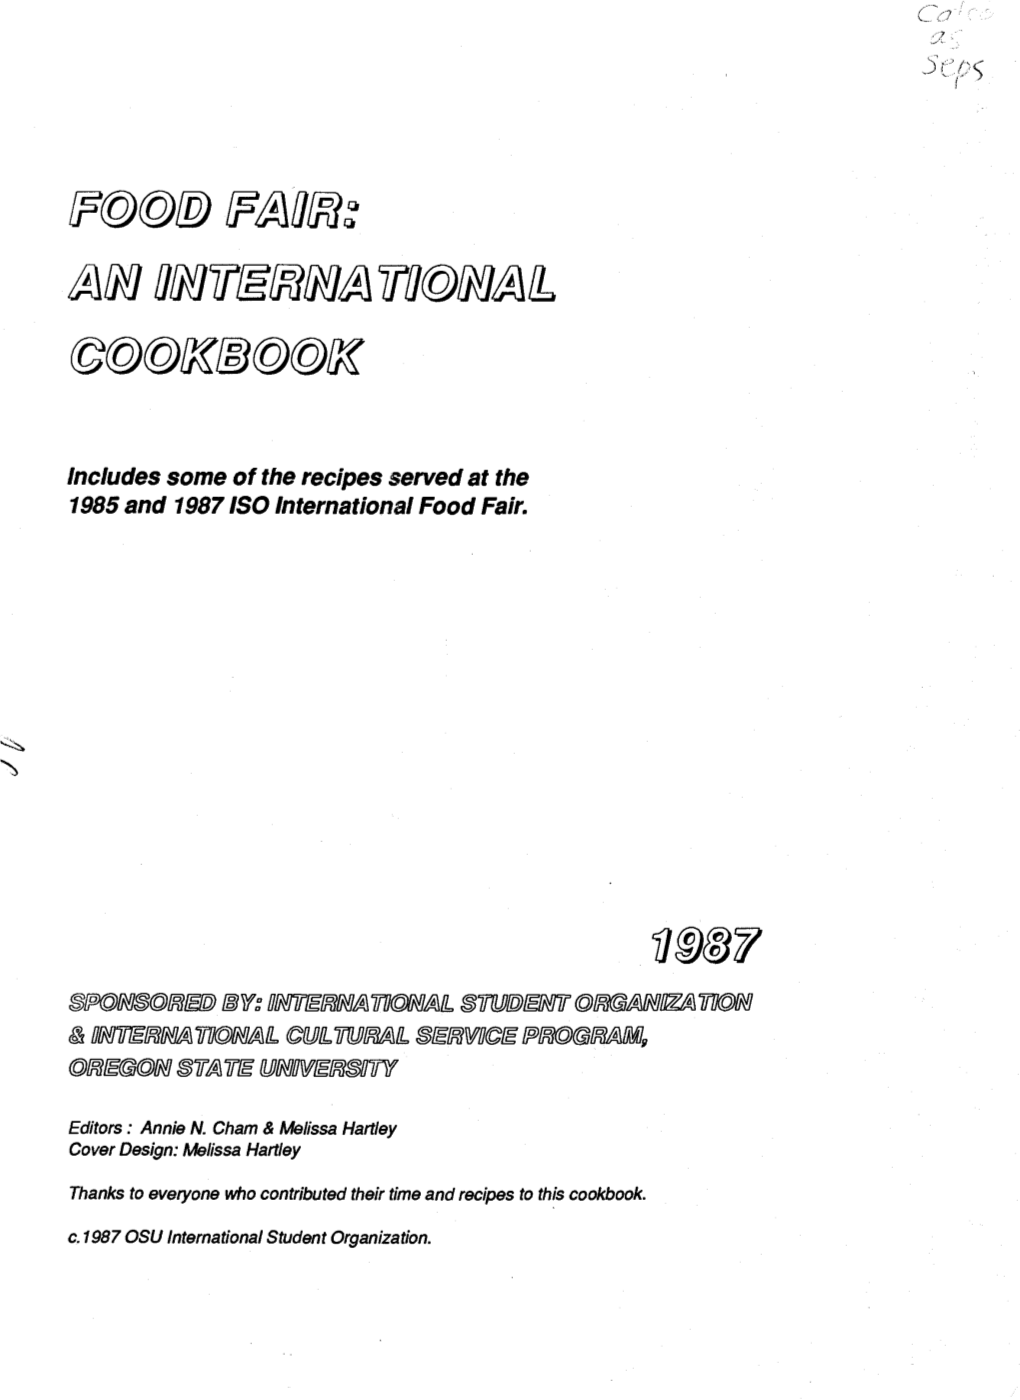 Includes Some of the Recipes Served at the 1985 and 1987 Iso International Food Fair